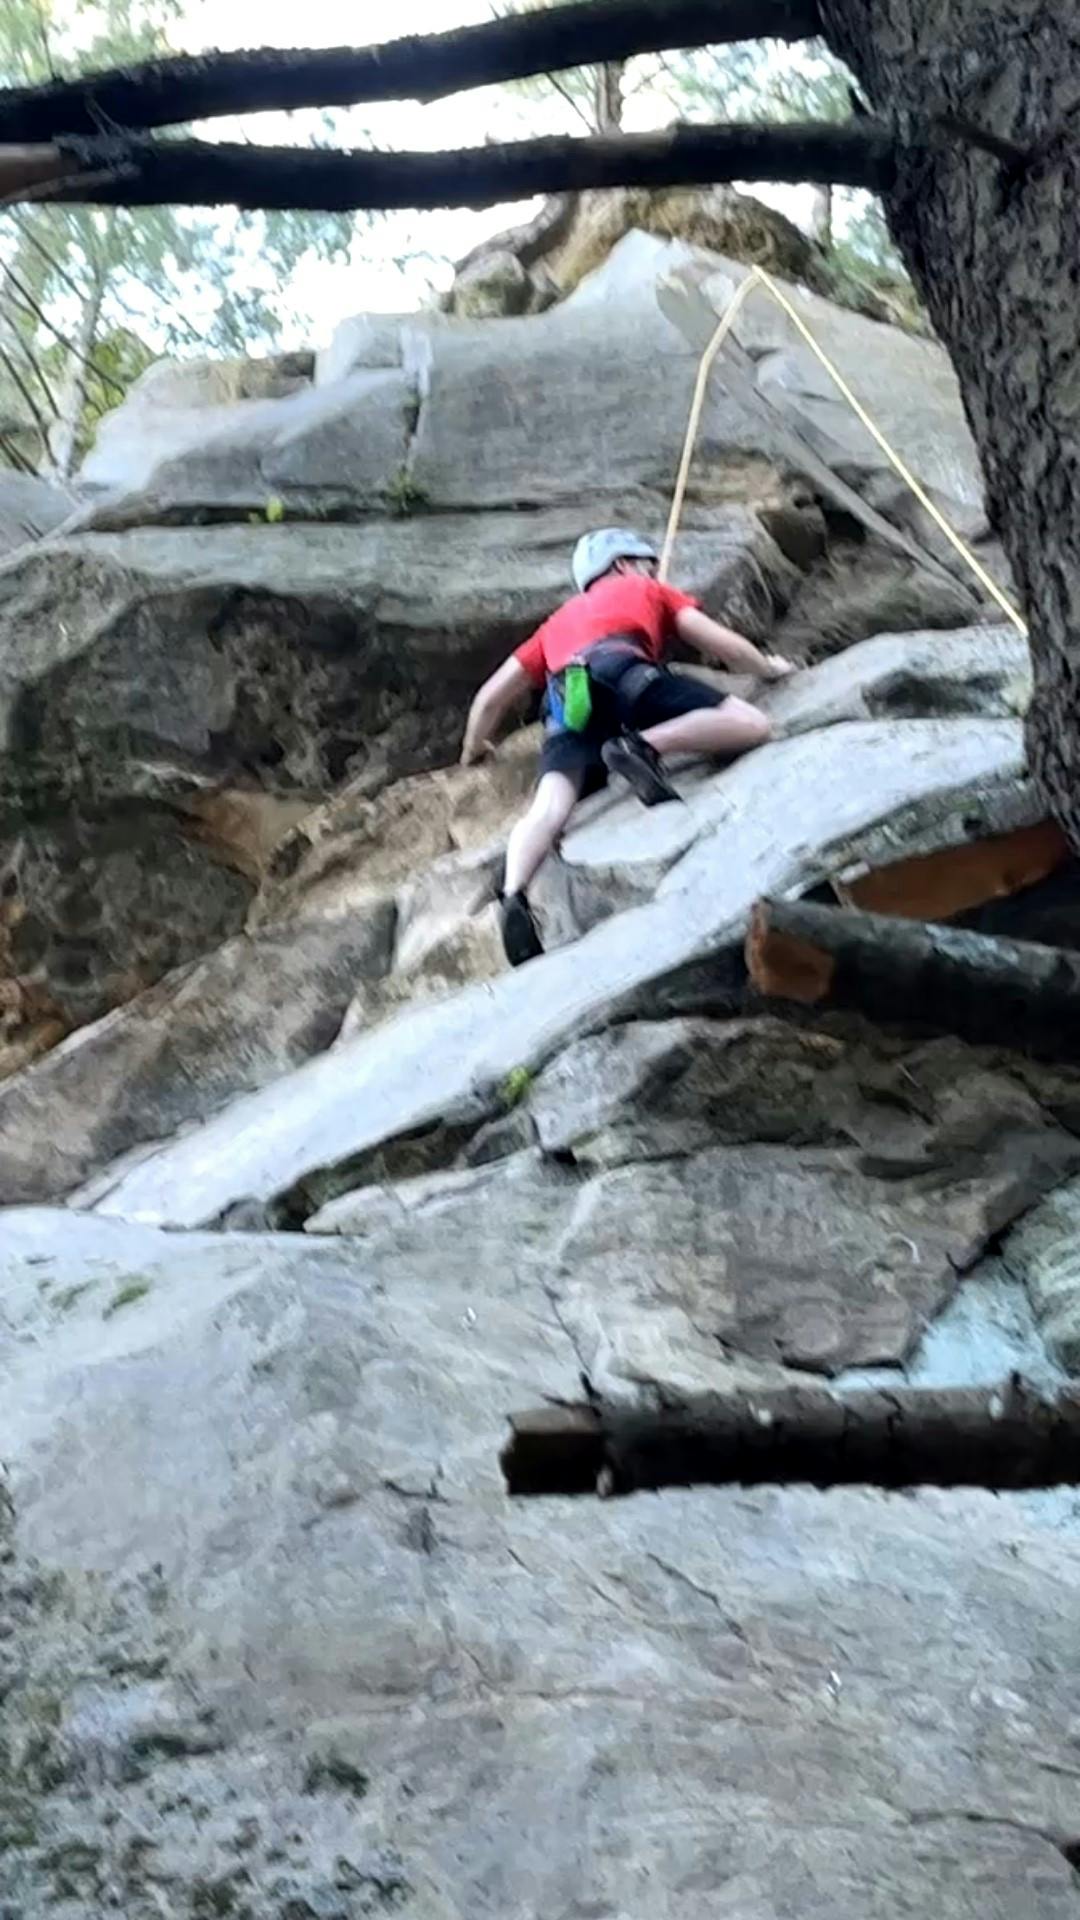 Image of Jordan Ready outside scaling a rock face with rock climbing saftey equipment